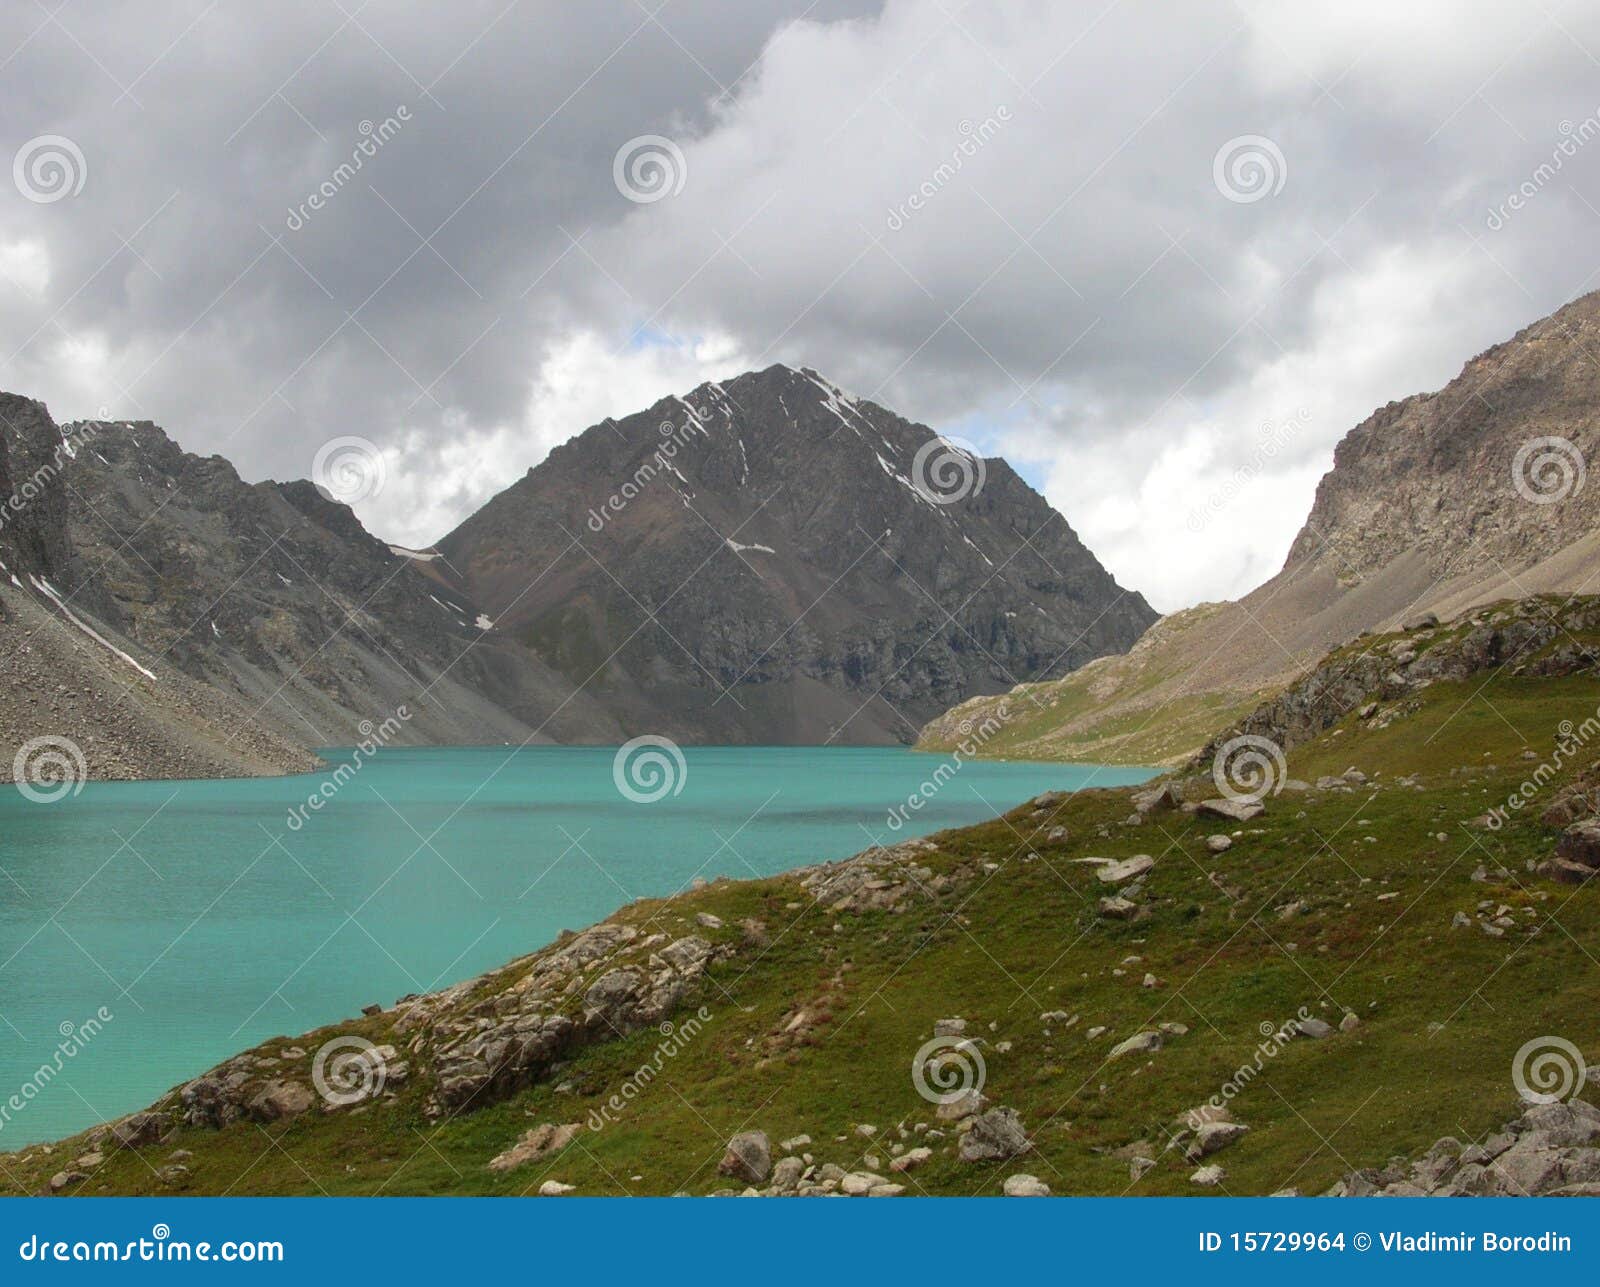 central asian tien-shan mountains